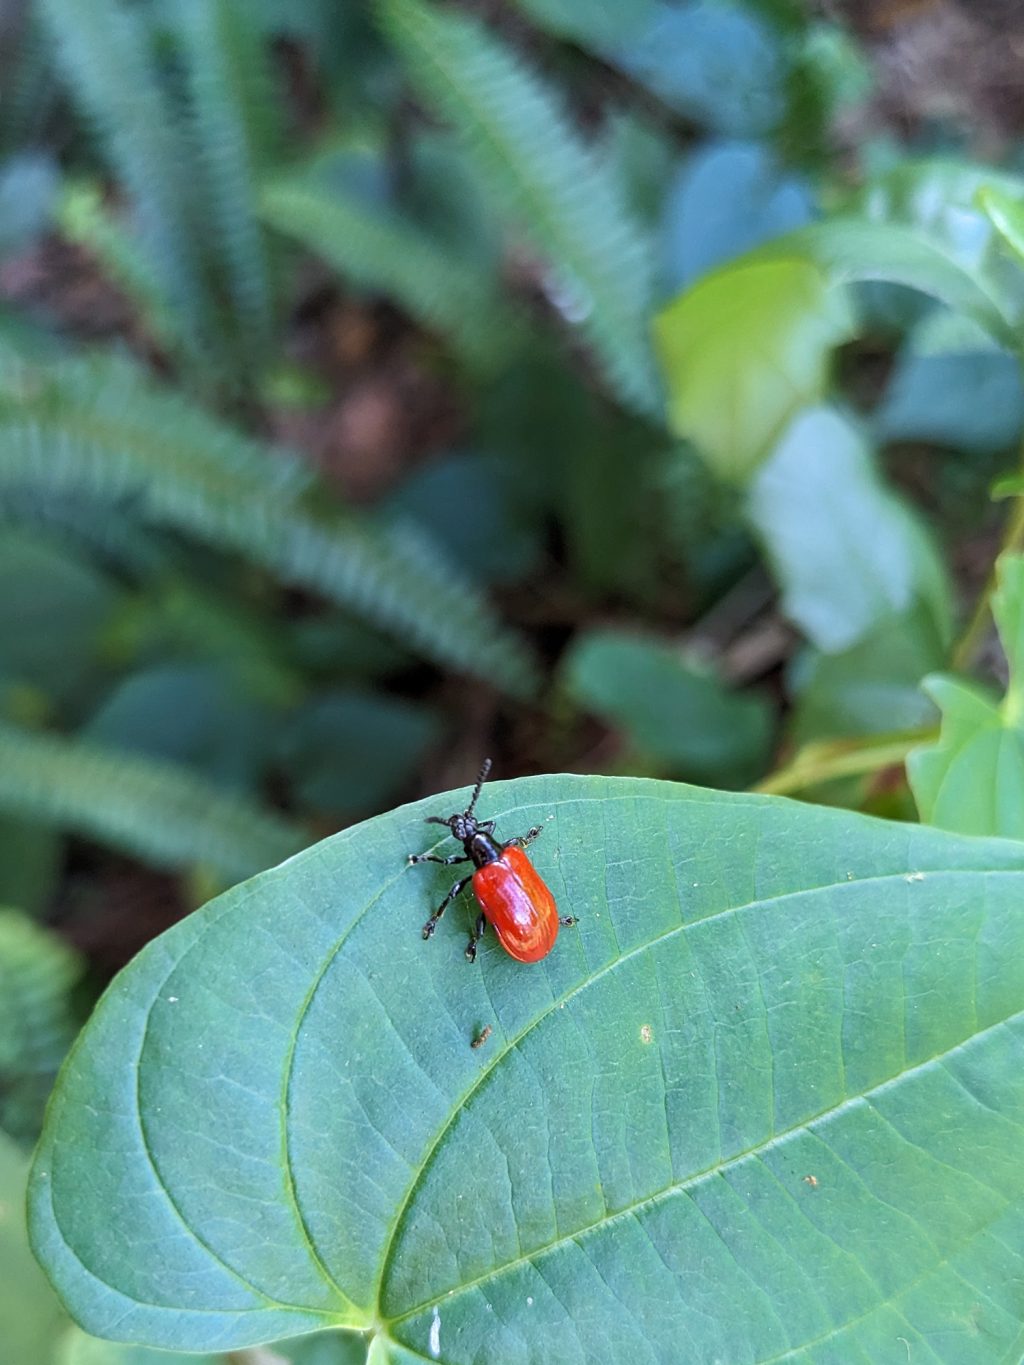 a small red beetle with a shiny carapace is sitting on the edge of a large leaf overlooking a shaded patch of ferns